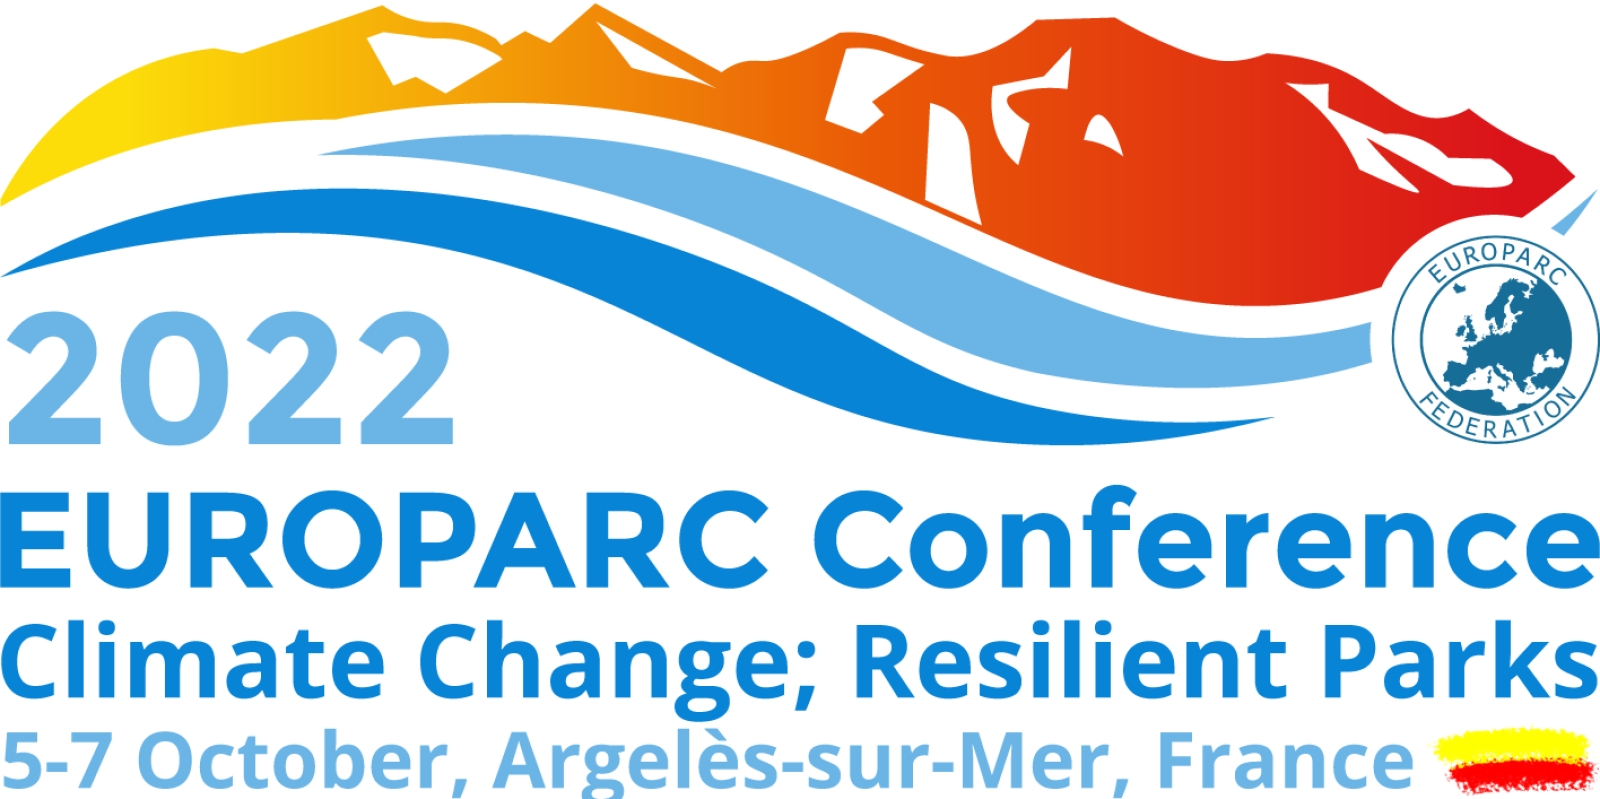 EUROPARC Conference 2022 - Climate Change, Resilient Parks